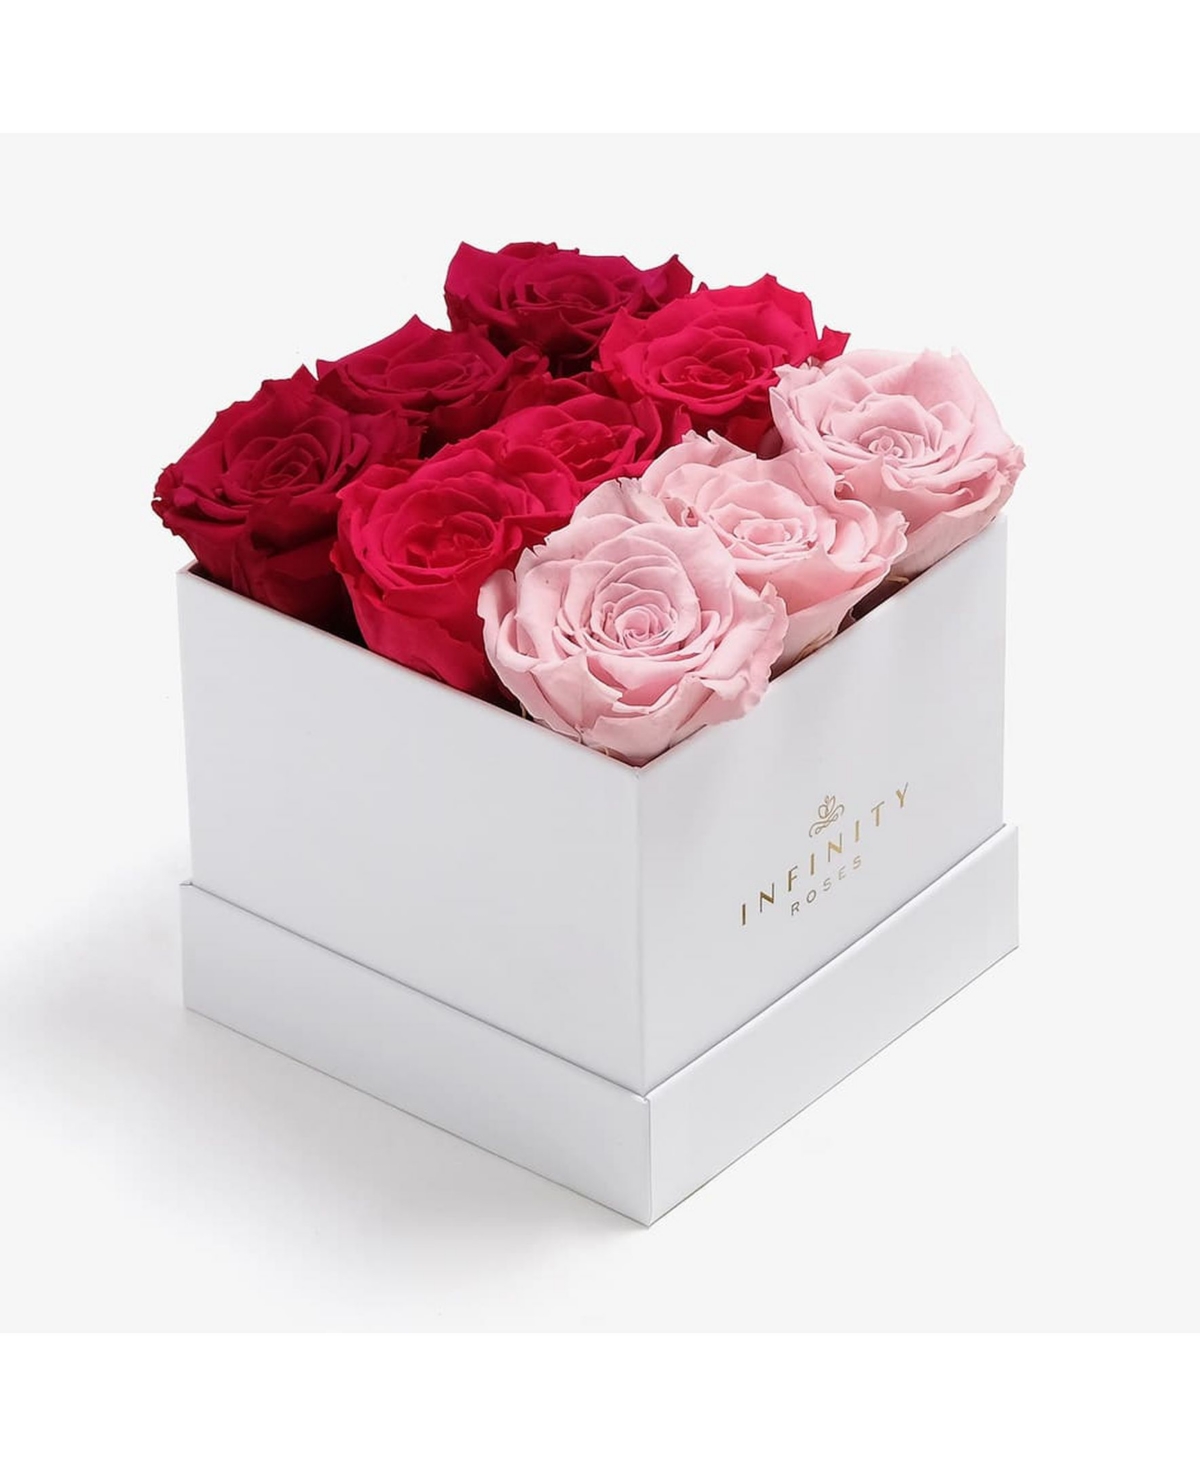 Square Box of 9 Pink Ombre Real Roses Preserved To Last Over A Year - Pink